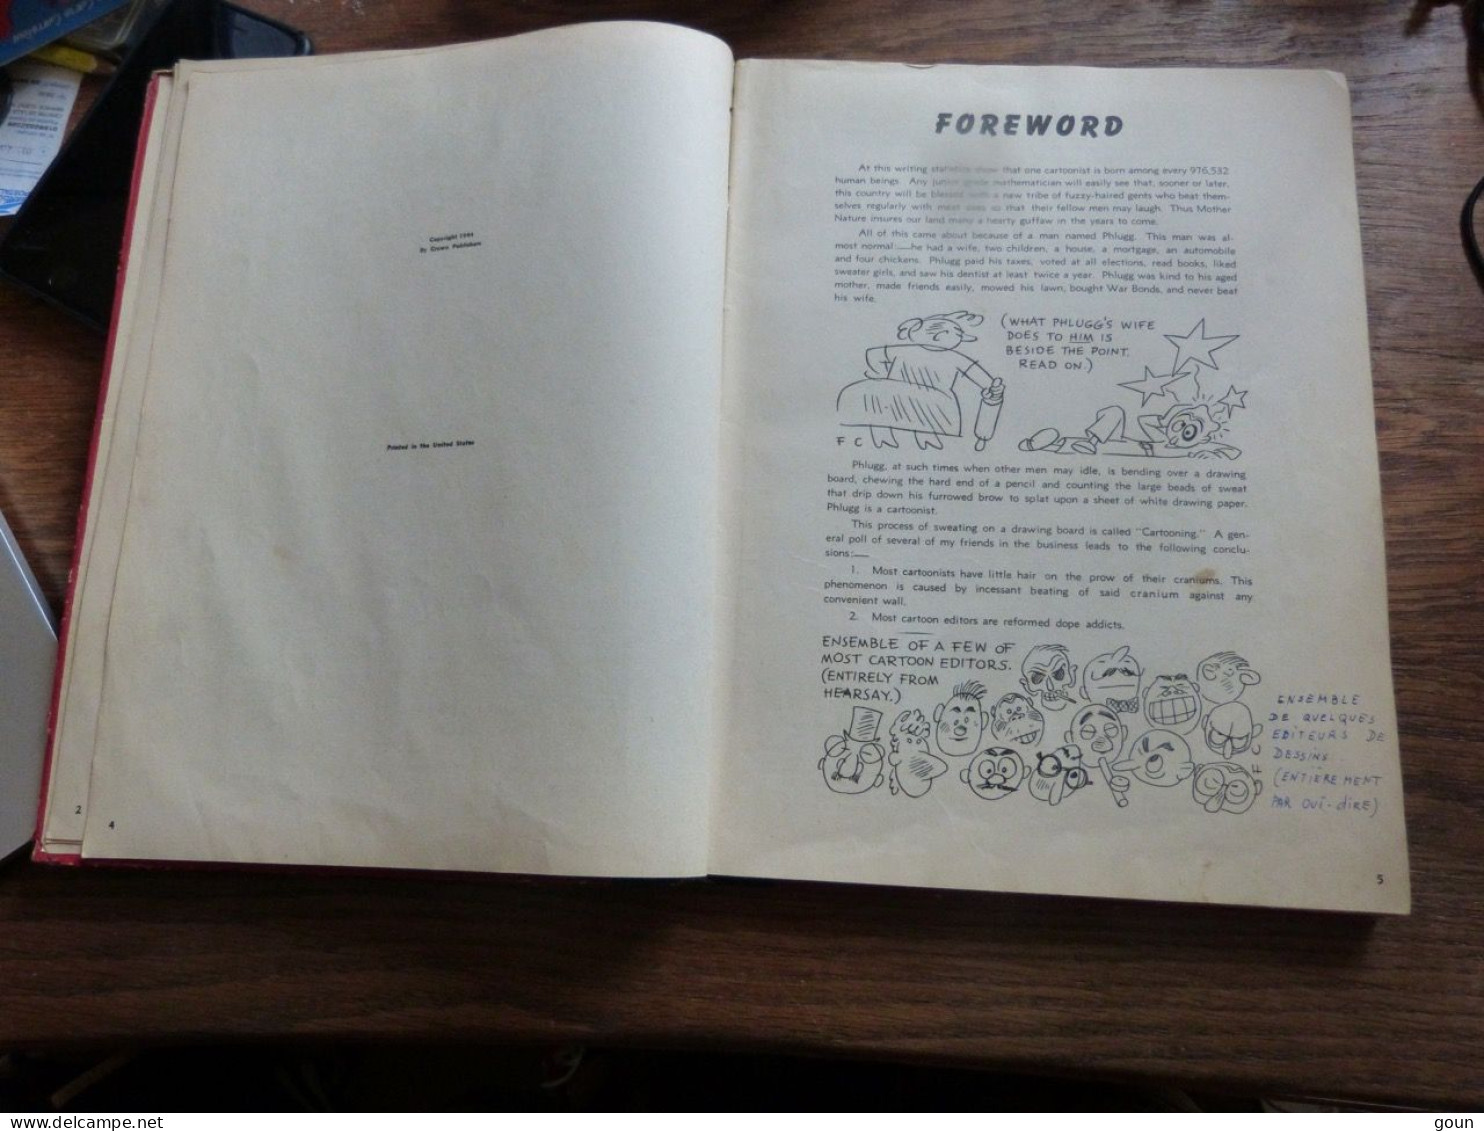 Best Cartoons Of The Year 1944 Lawrence Lariar 128 Pages - Andere Uitgevers